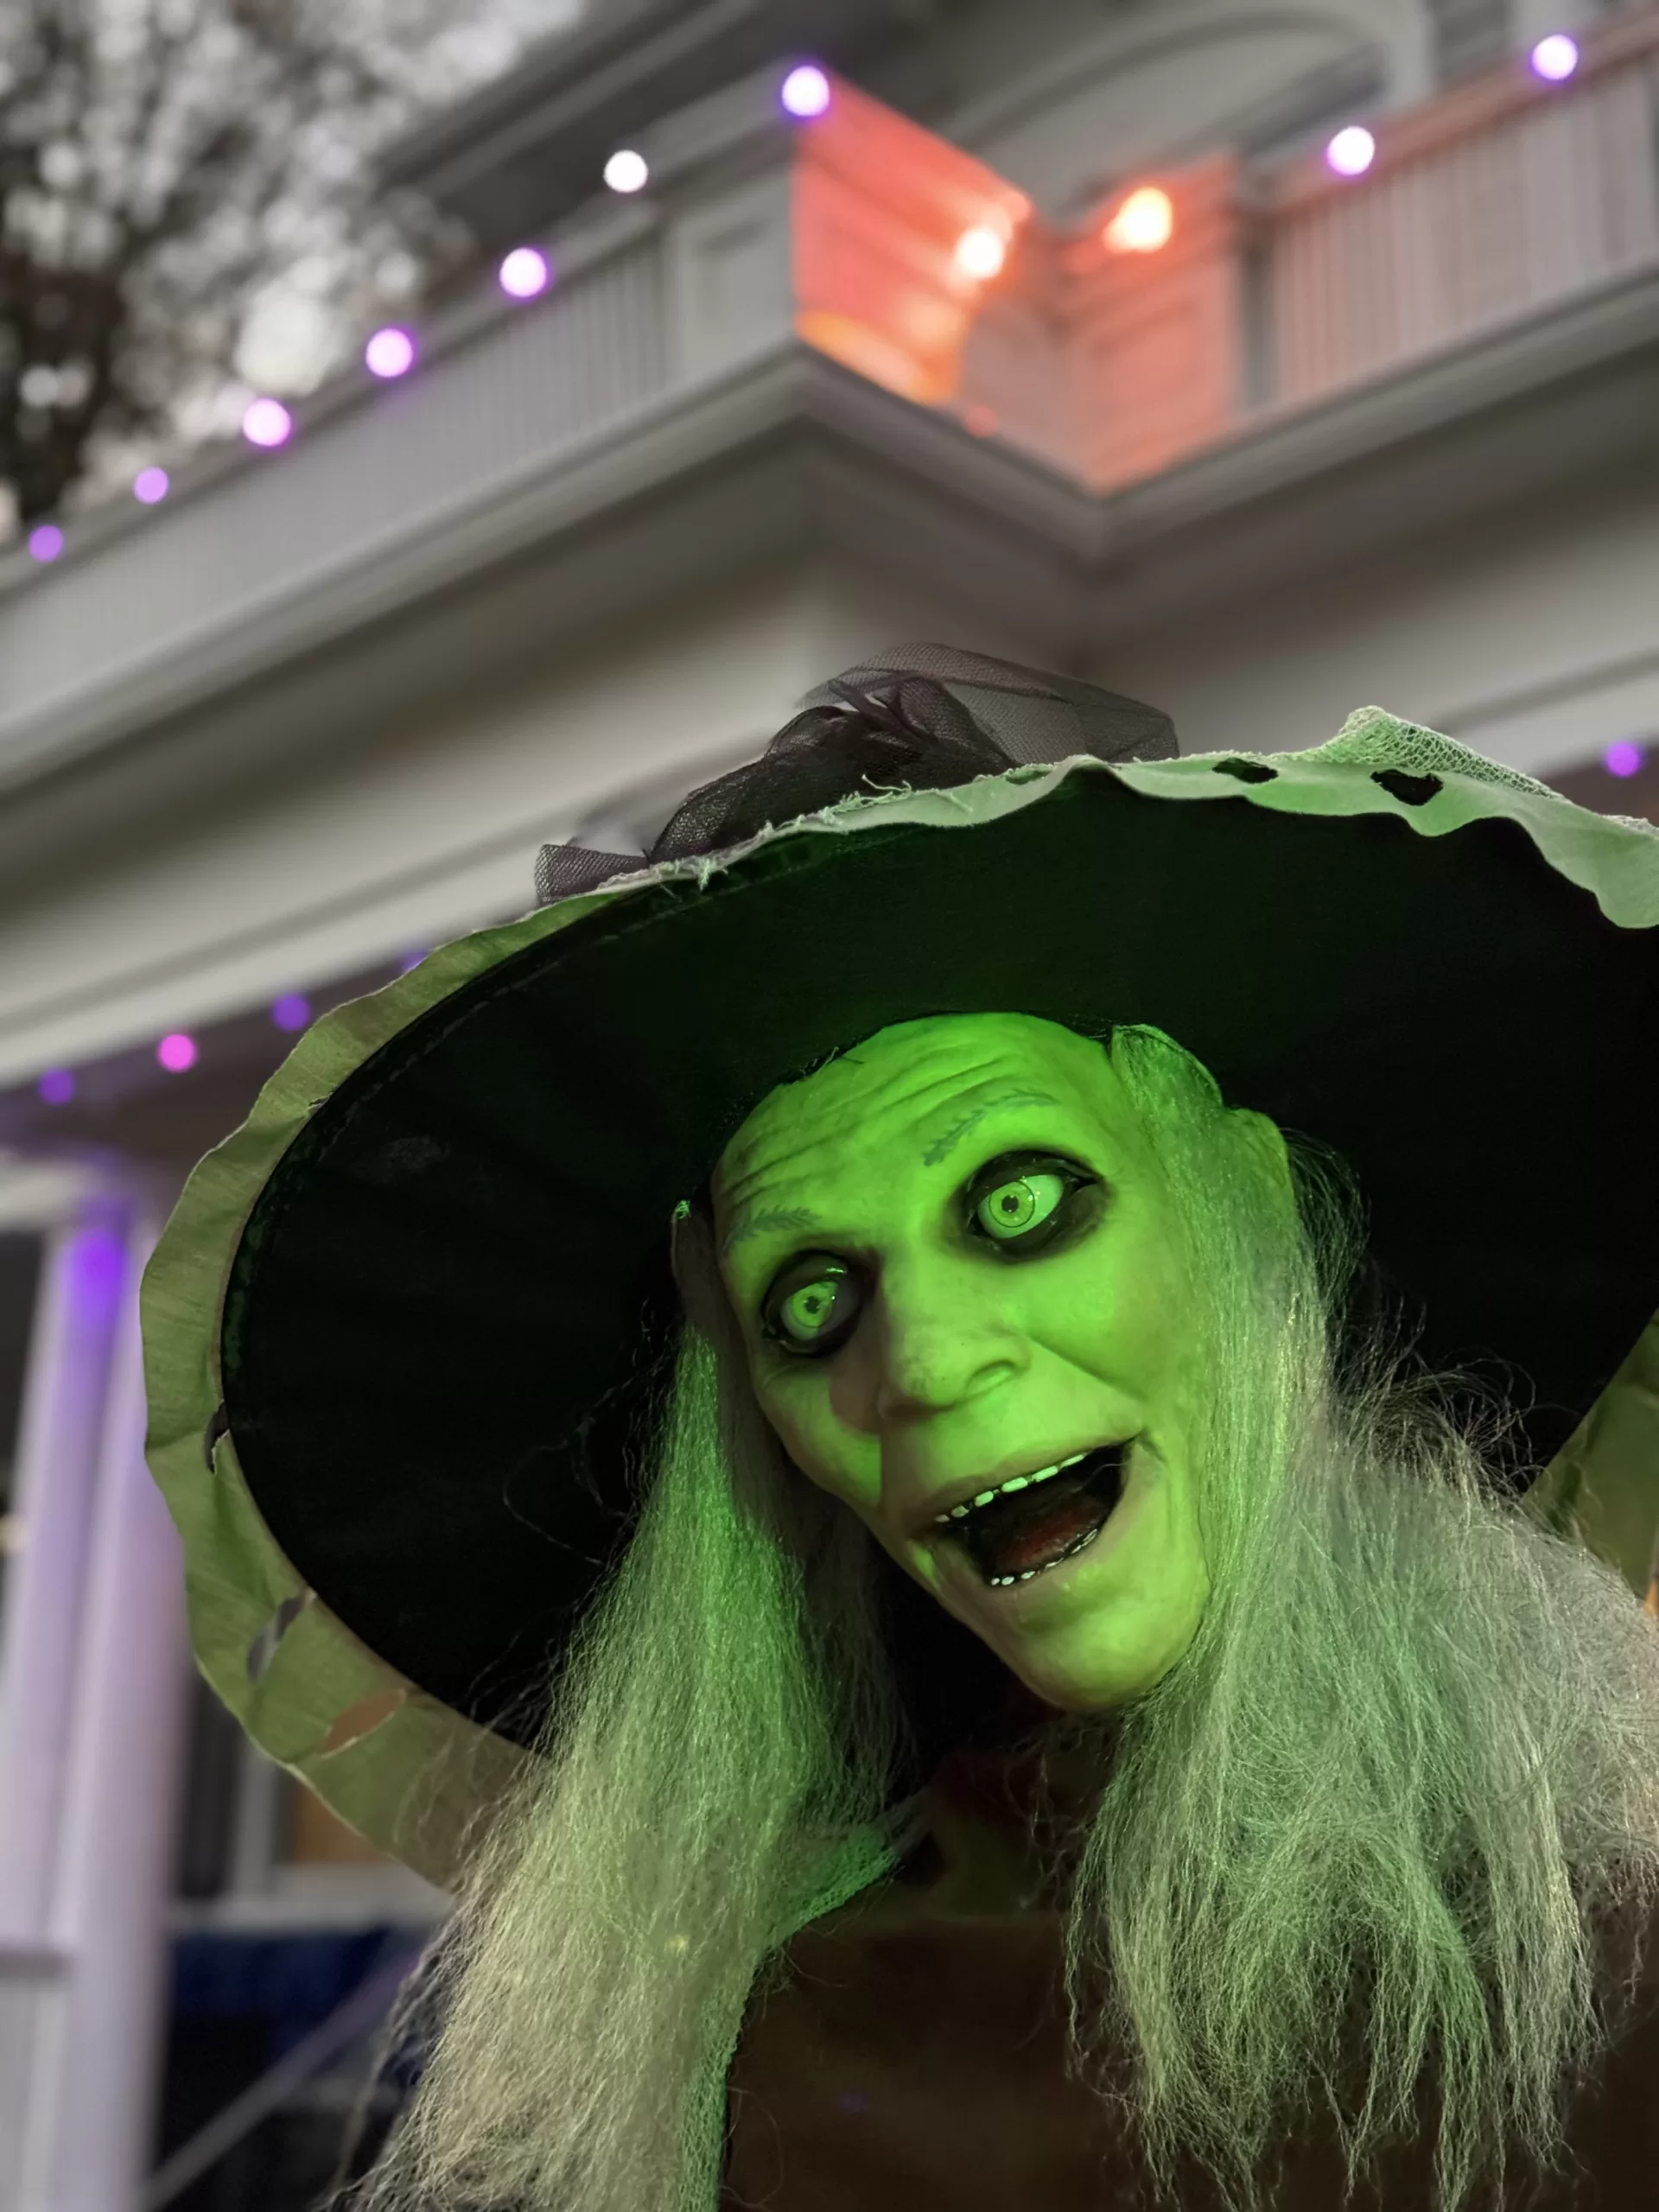 A witch mannequin in the foreground as part of Halloween decorations. The house is out of focus in the background, but decorative lights can be seen outlining the house.